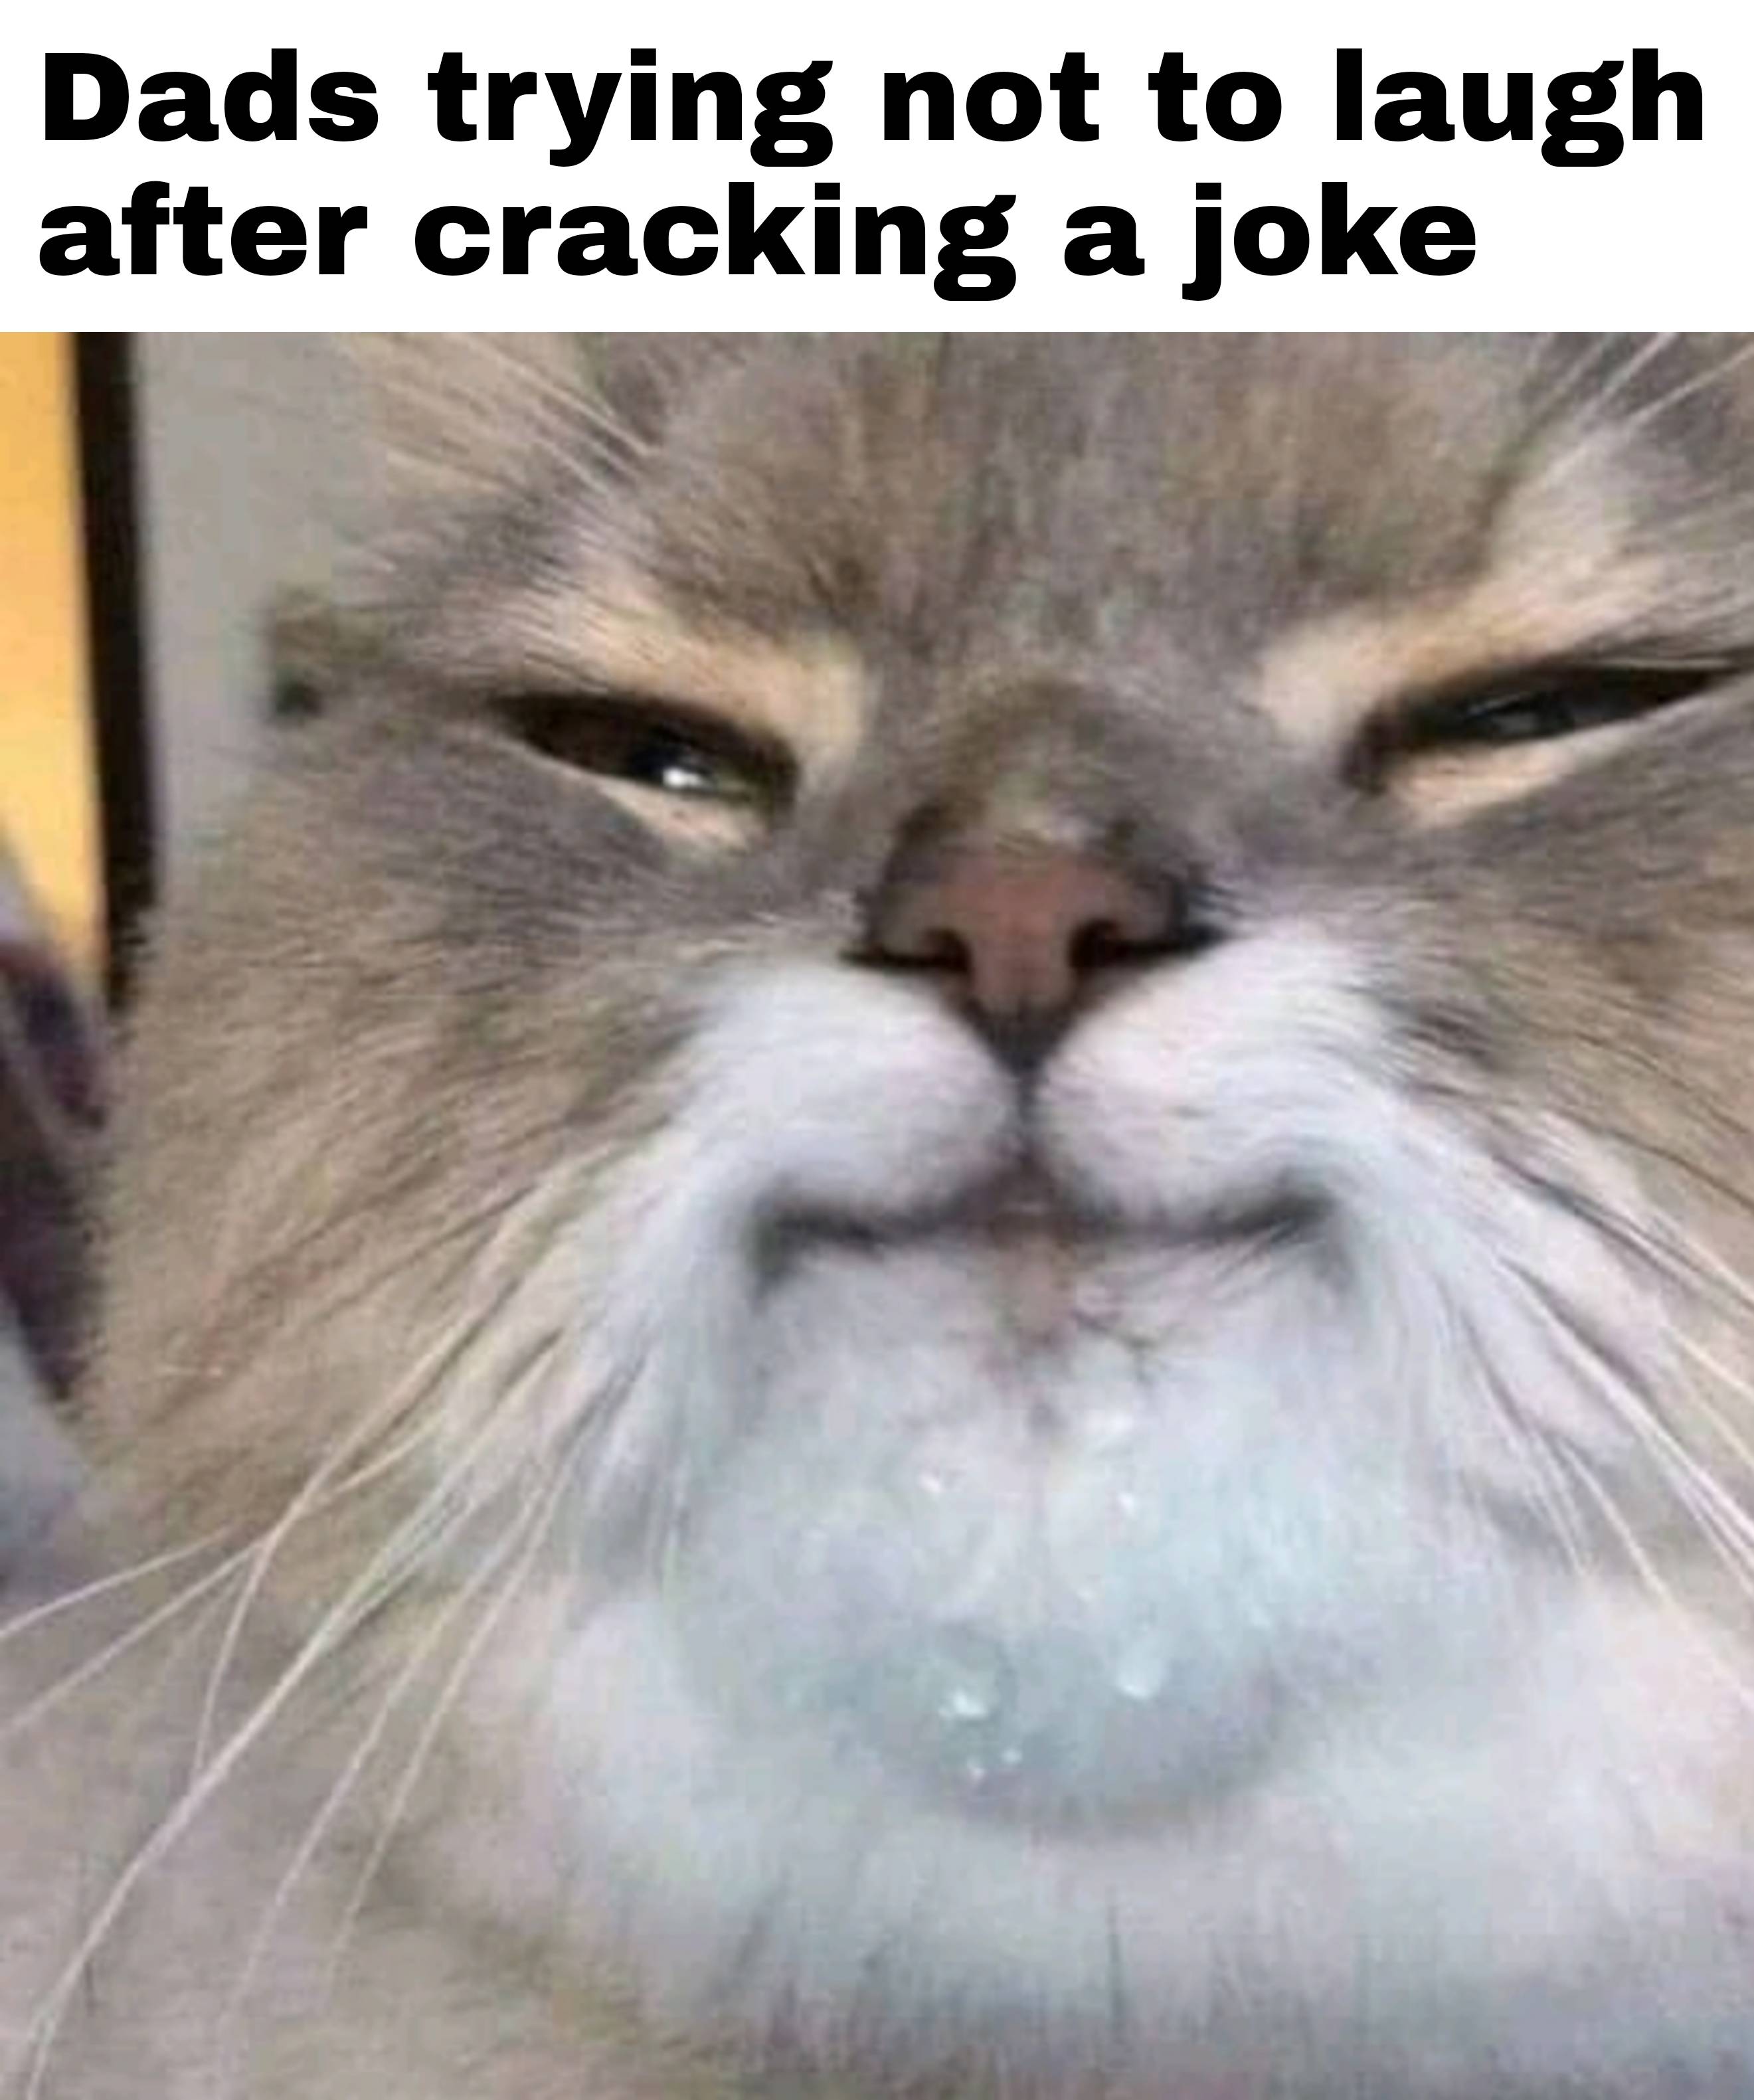 monday morning randomness - cat drink water meme - Dads trying not to laugh after cracking a joke